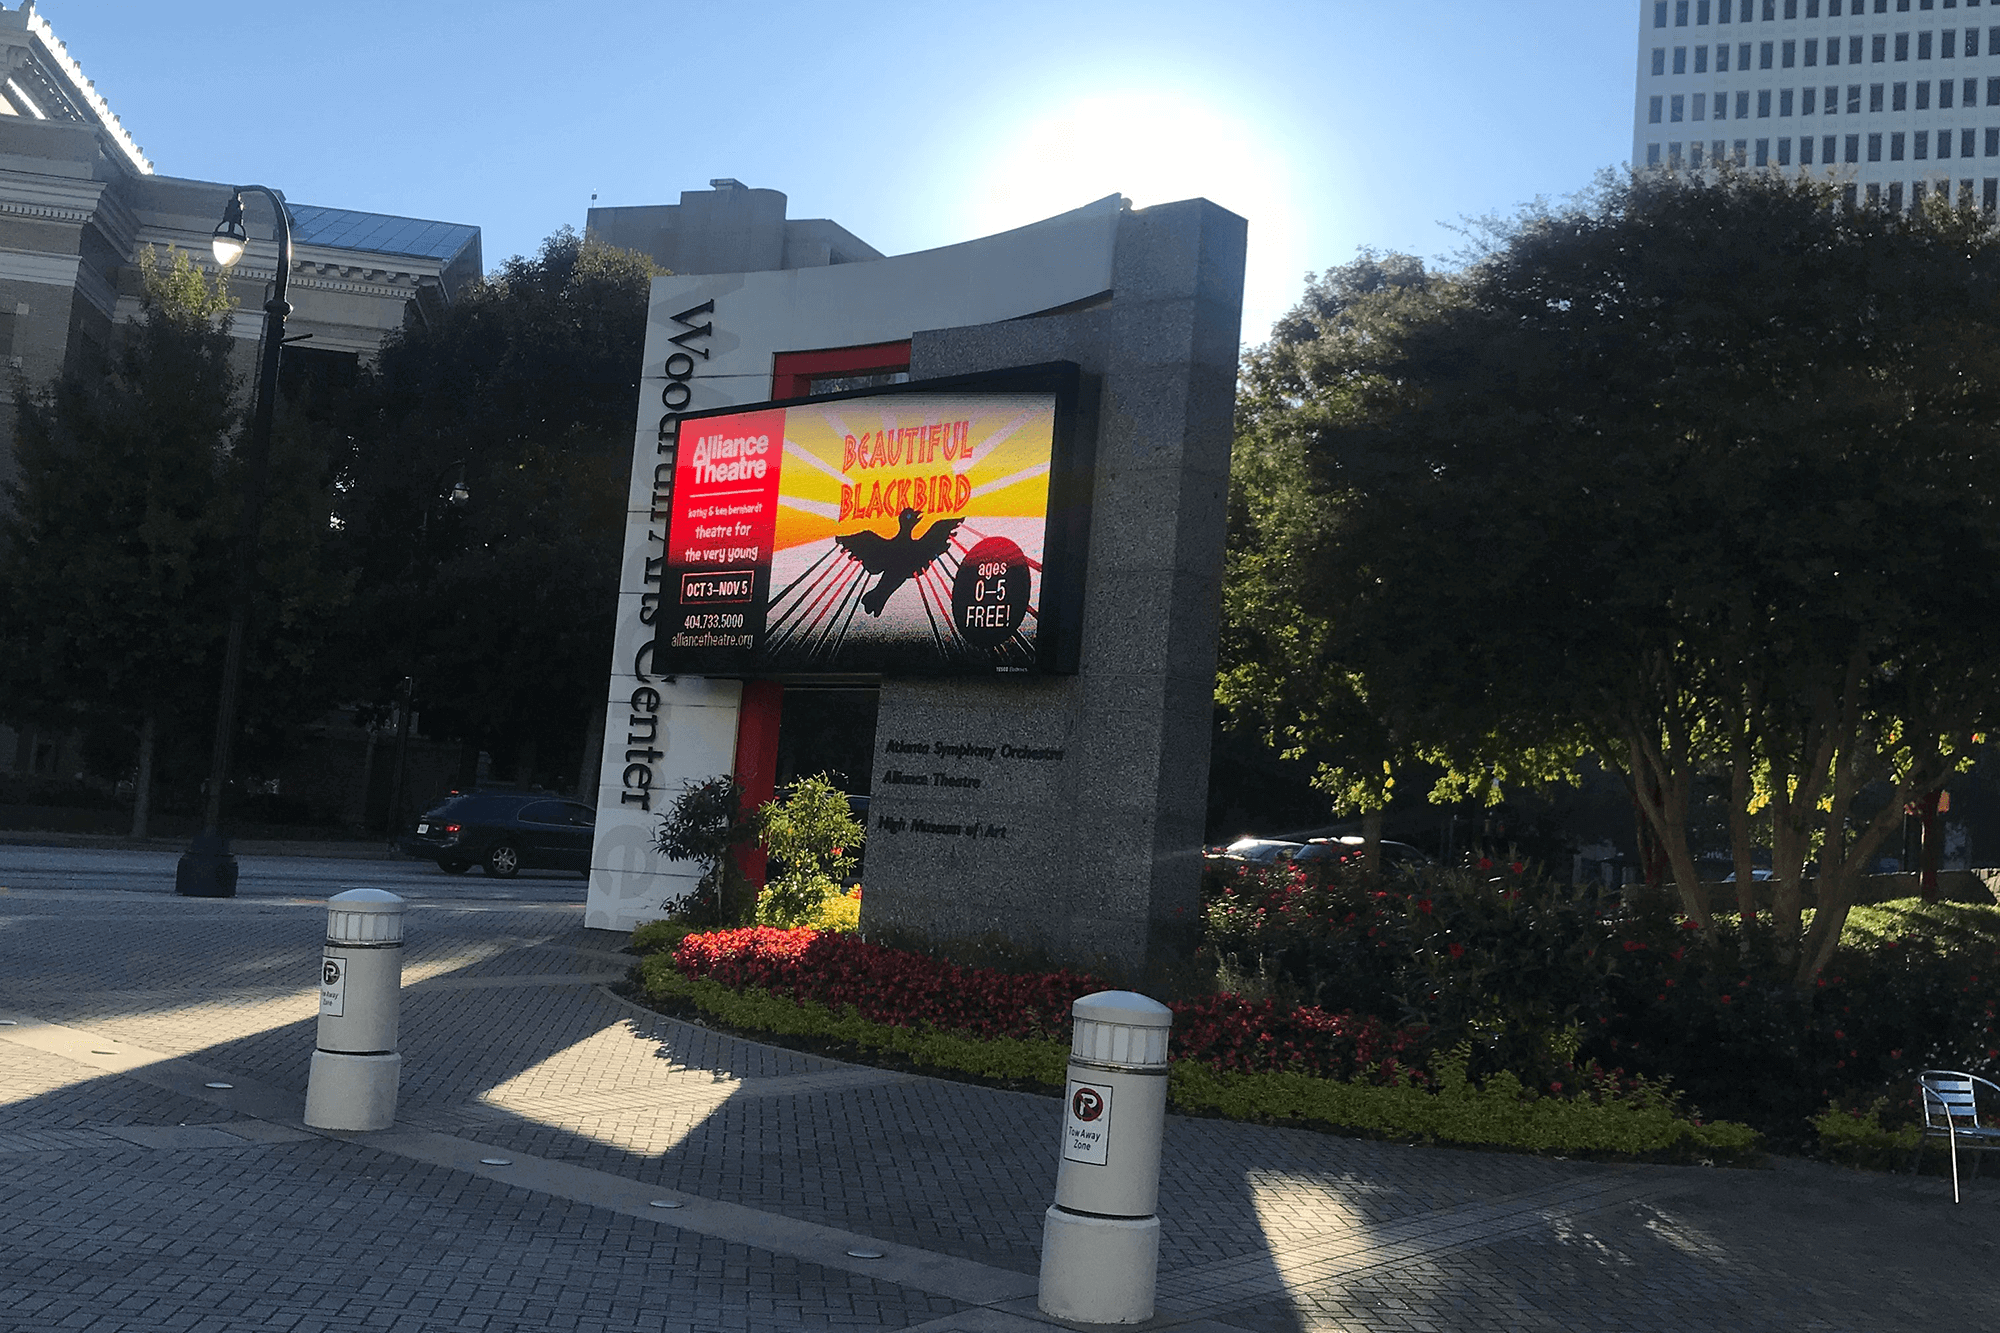 Red and black outdoor digital signage featured in front of an Arts Center